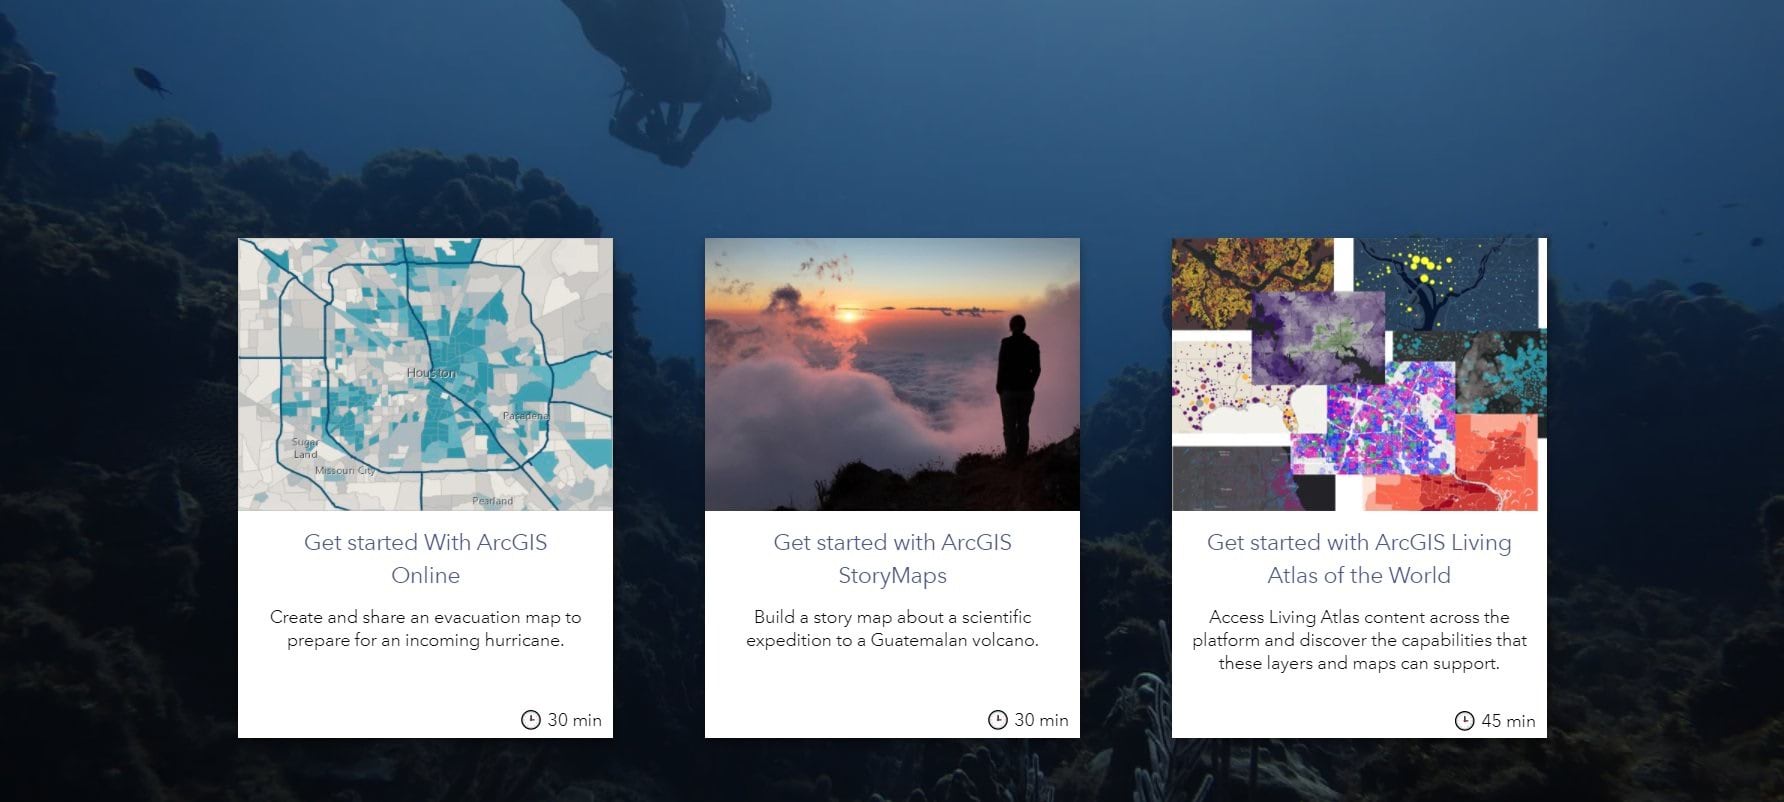 A screenshot of three story cards side by side that feature and link to a Getting Started with ArcGIS lesson, a Getting Started with ArcGIS StoryMaps learn path, and a Getting Started with ArcGIS Living Atlas learn path